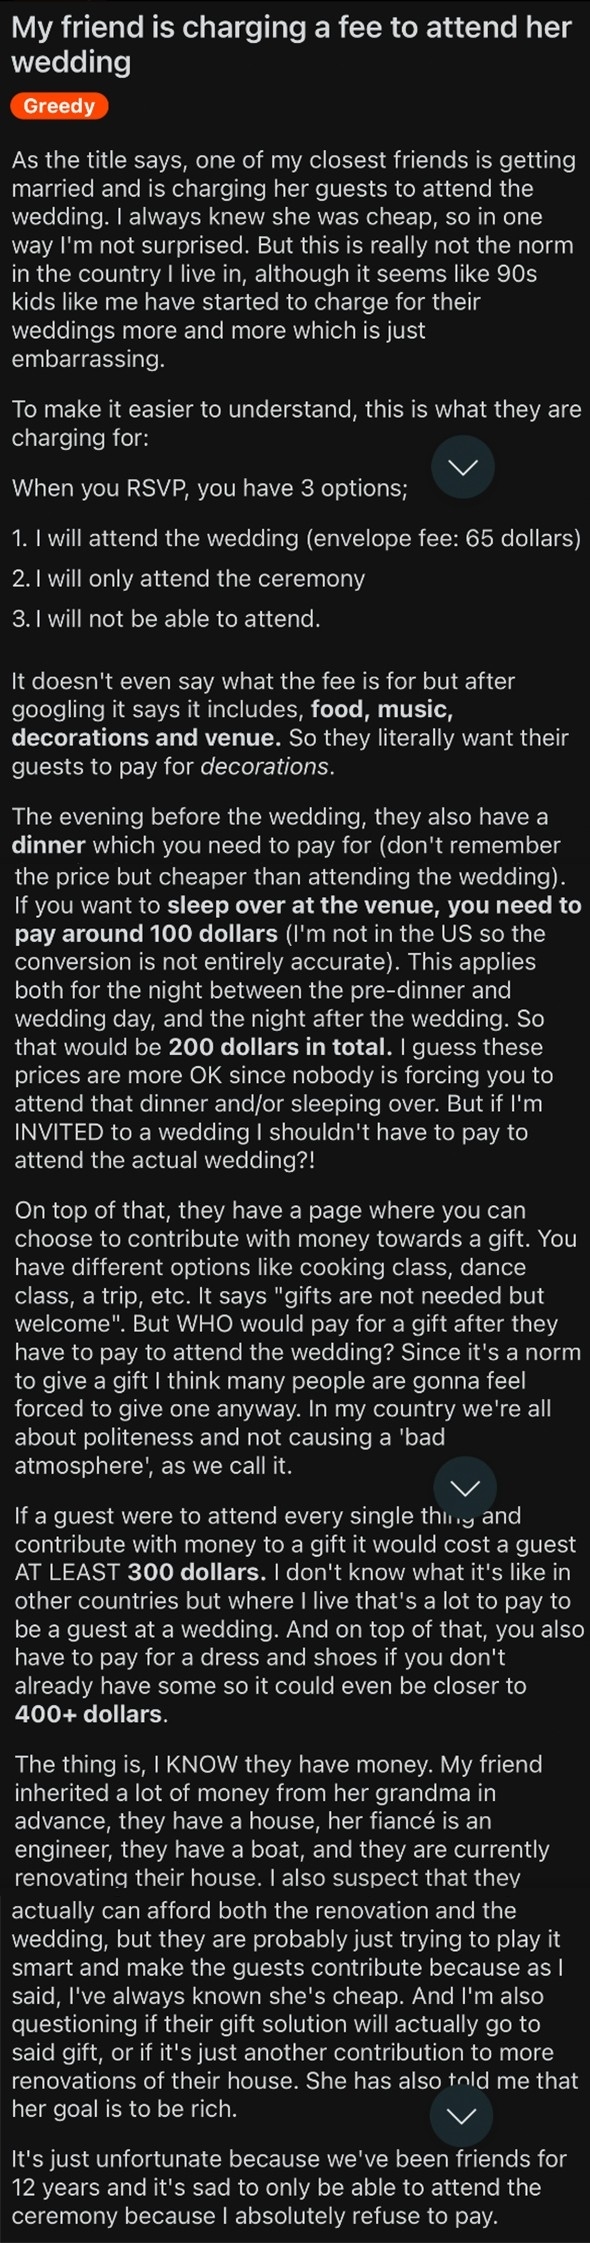 Summarized text: A wedding invitation includes a cover charge for guests, with three payment options for attendance, and the writer expresses frustration over the fee